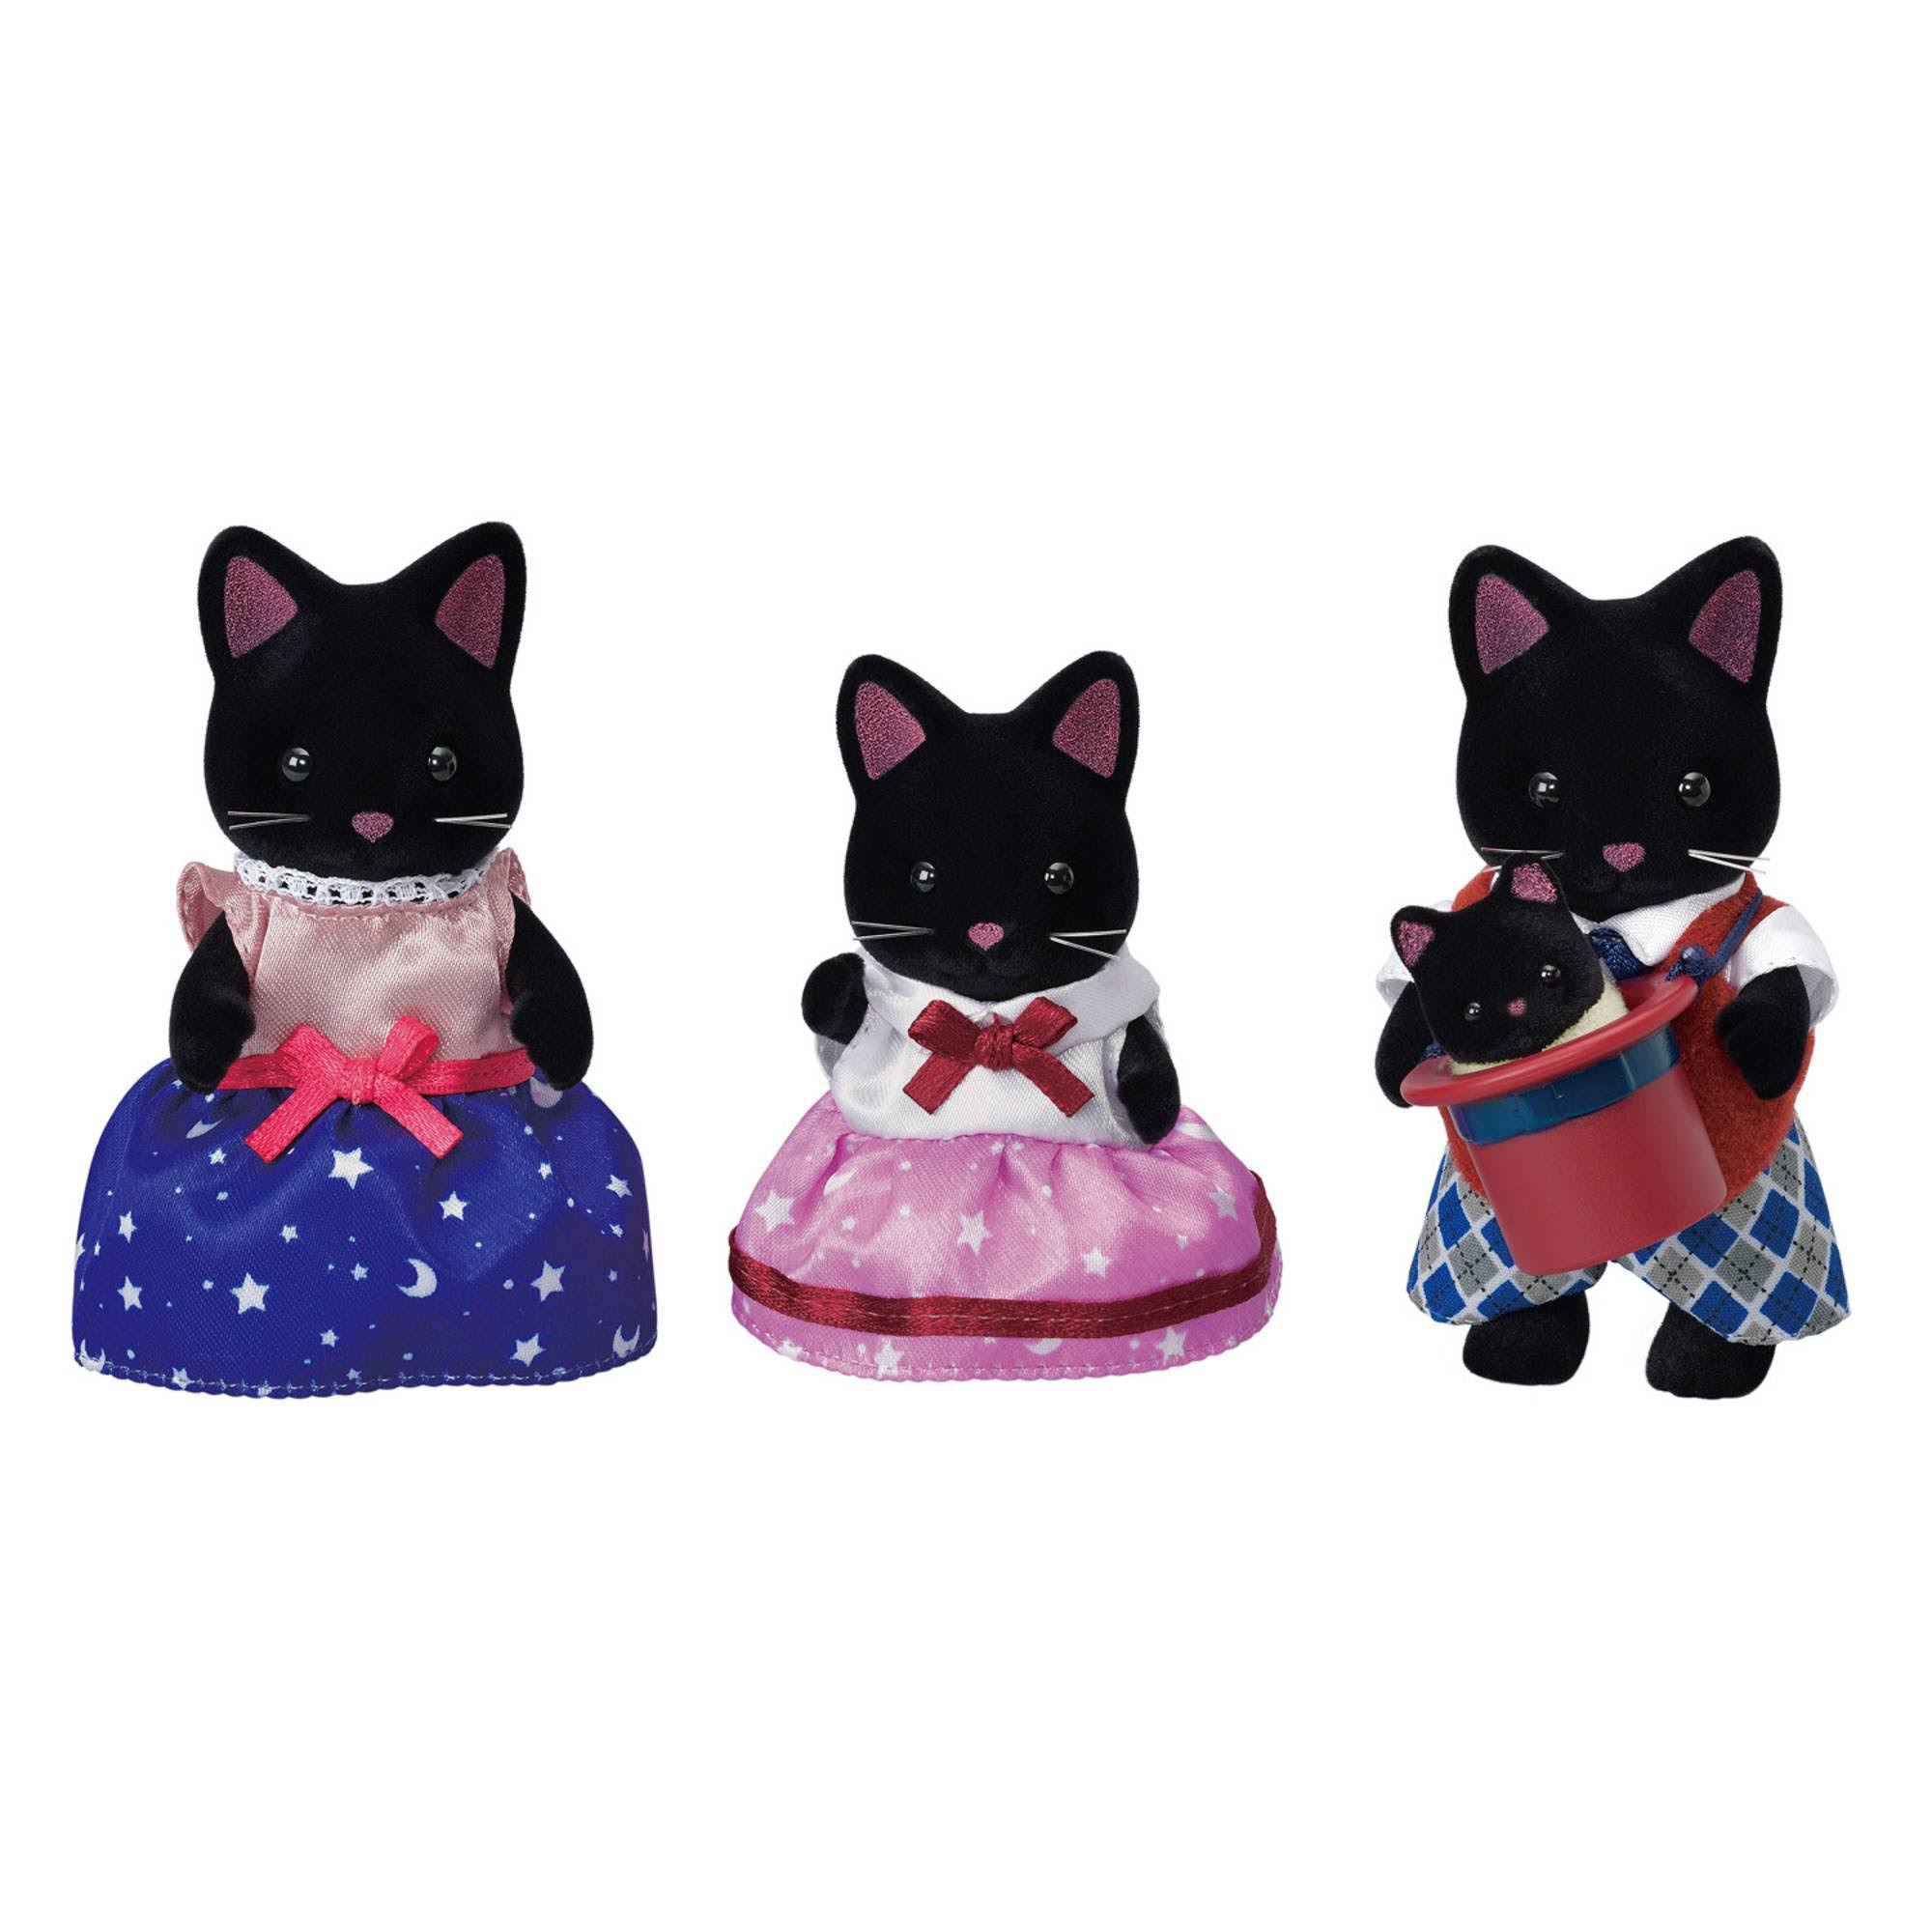 Calico Critters Midnight Cat Family, Dolls, Dollhouse Figures, Collectible Toys With 4 Figures Included